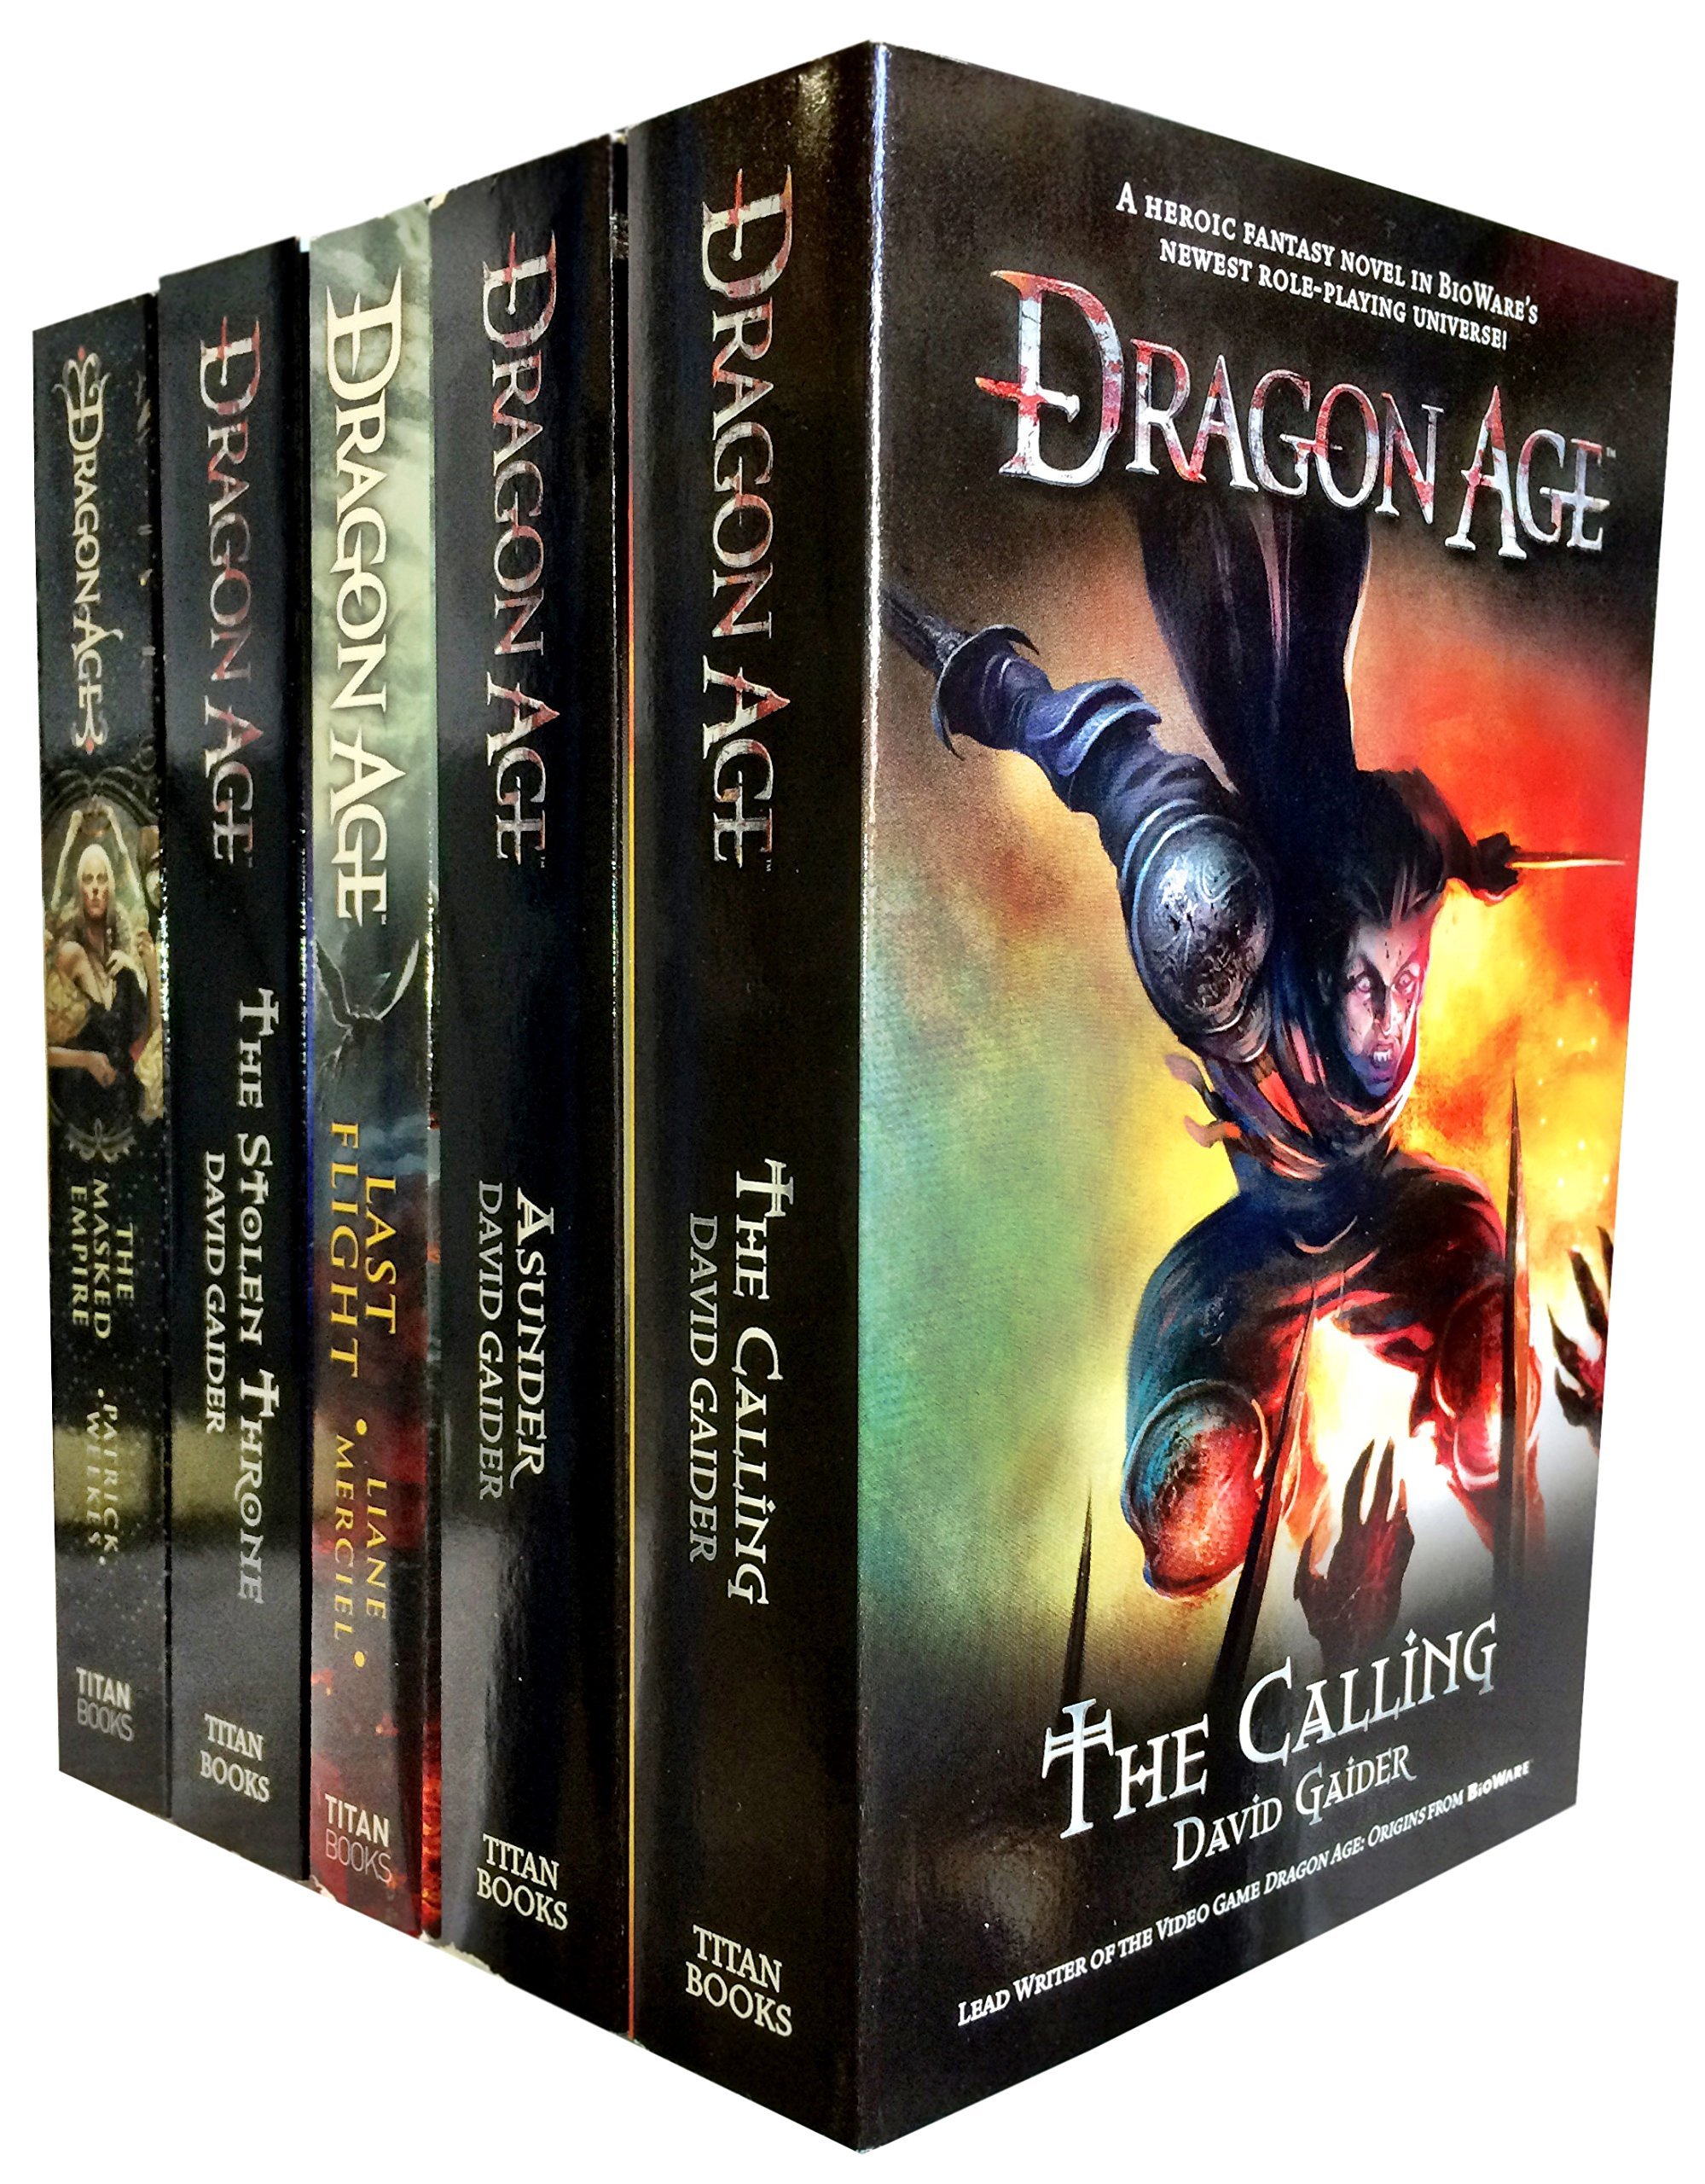 Book Cover David Gaider Dragon Age Series 5 Books Collection Set (Stolen Throne, Calling, Asunder, Last Flight, Masked Empire)